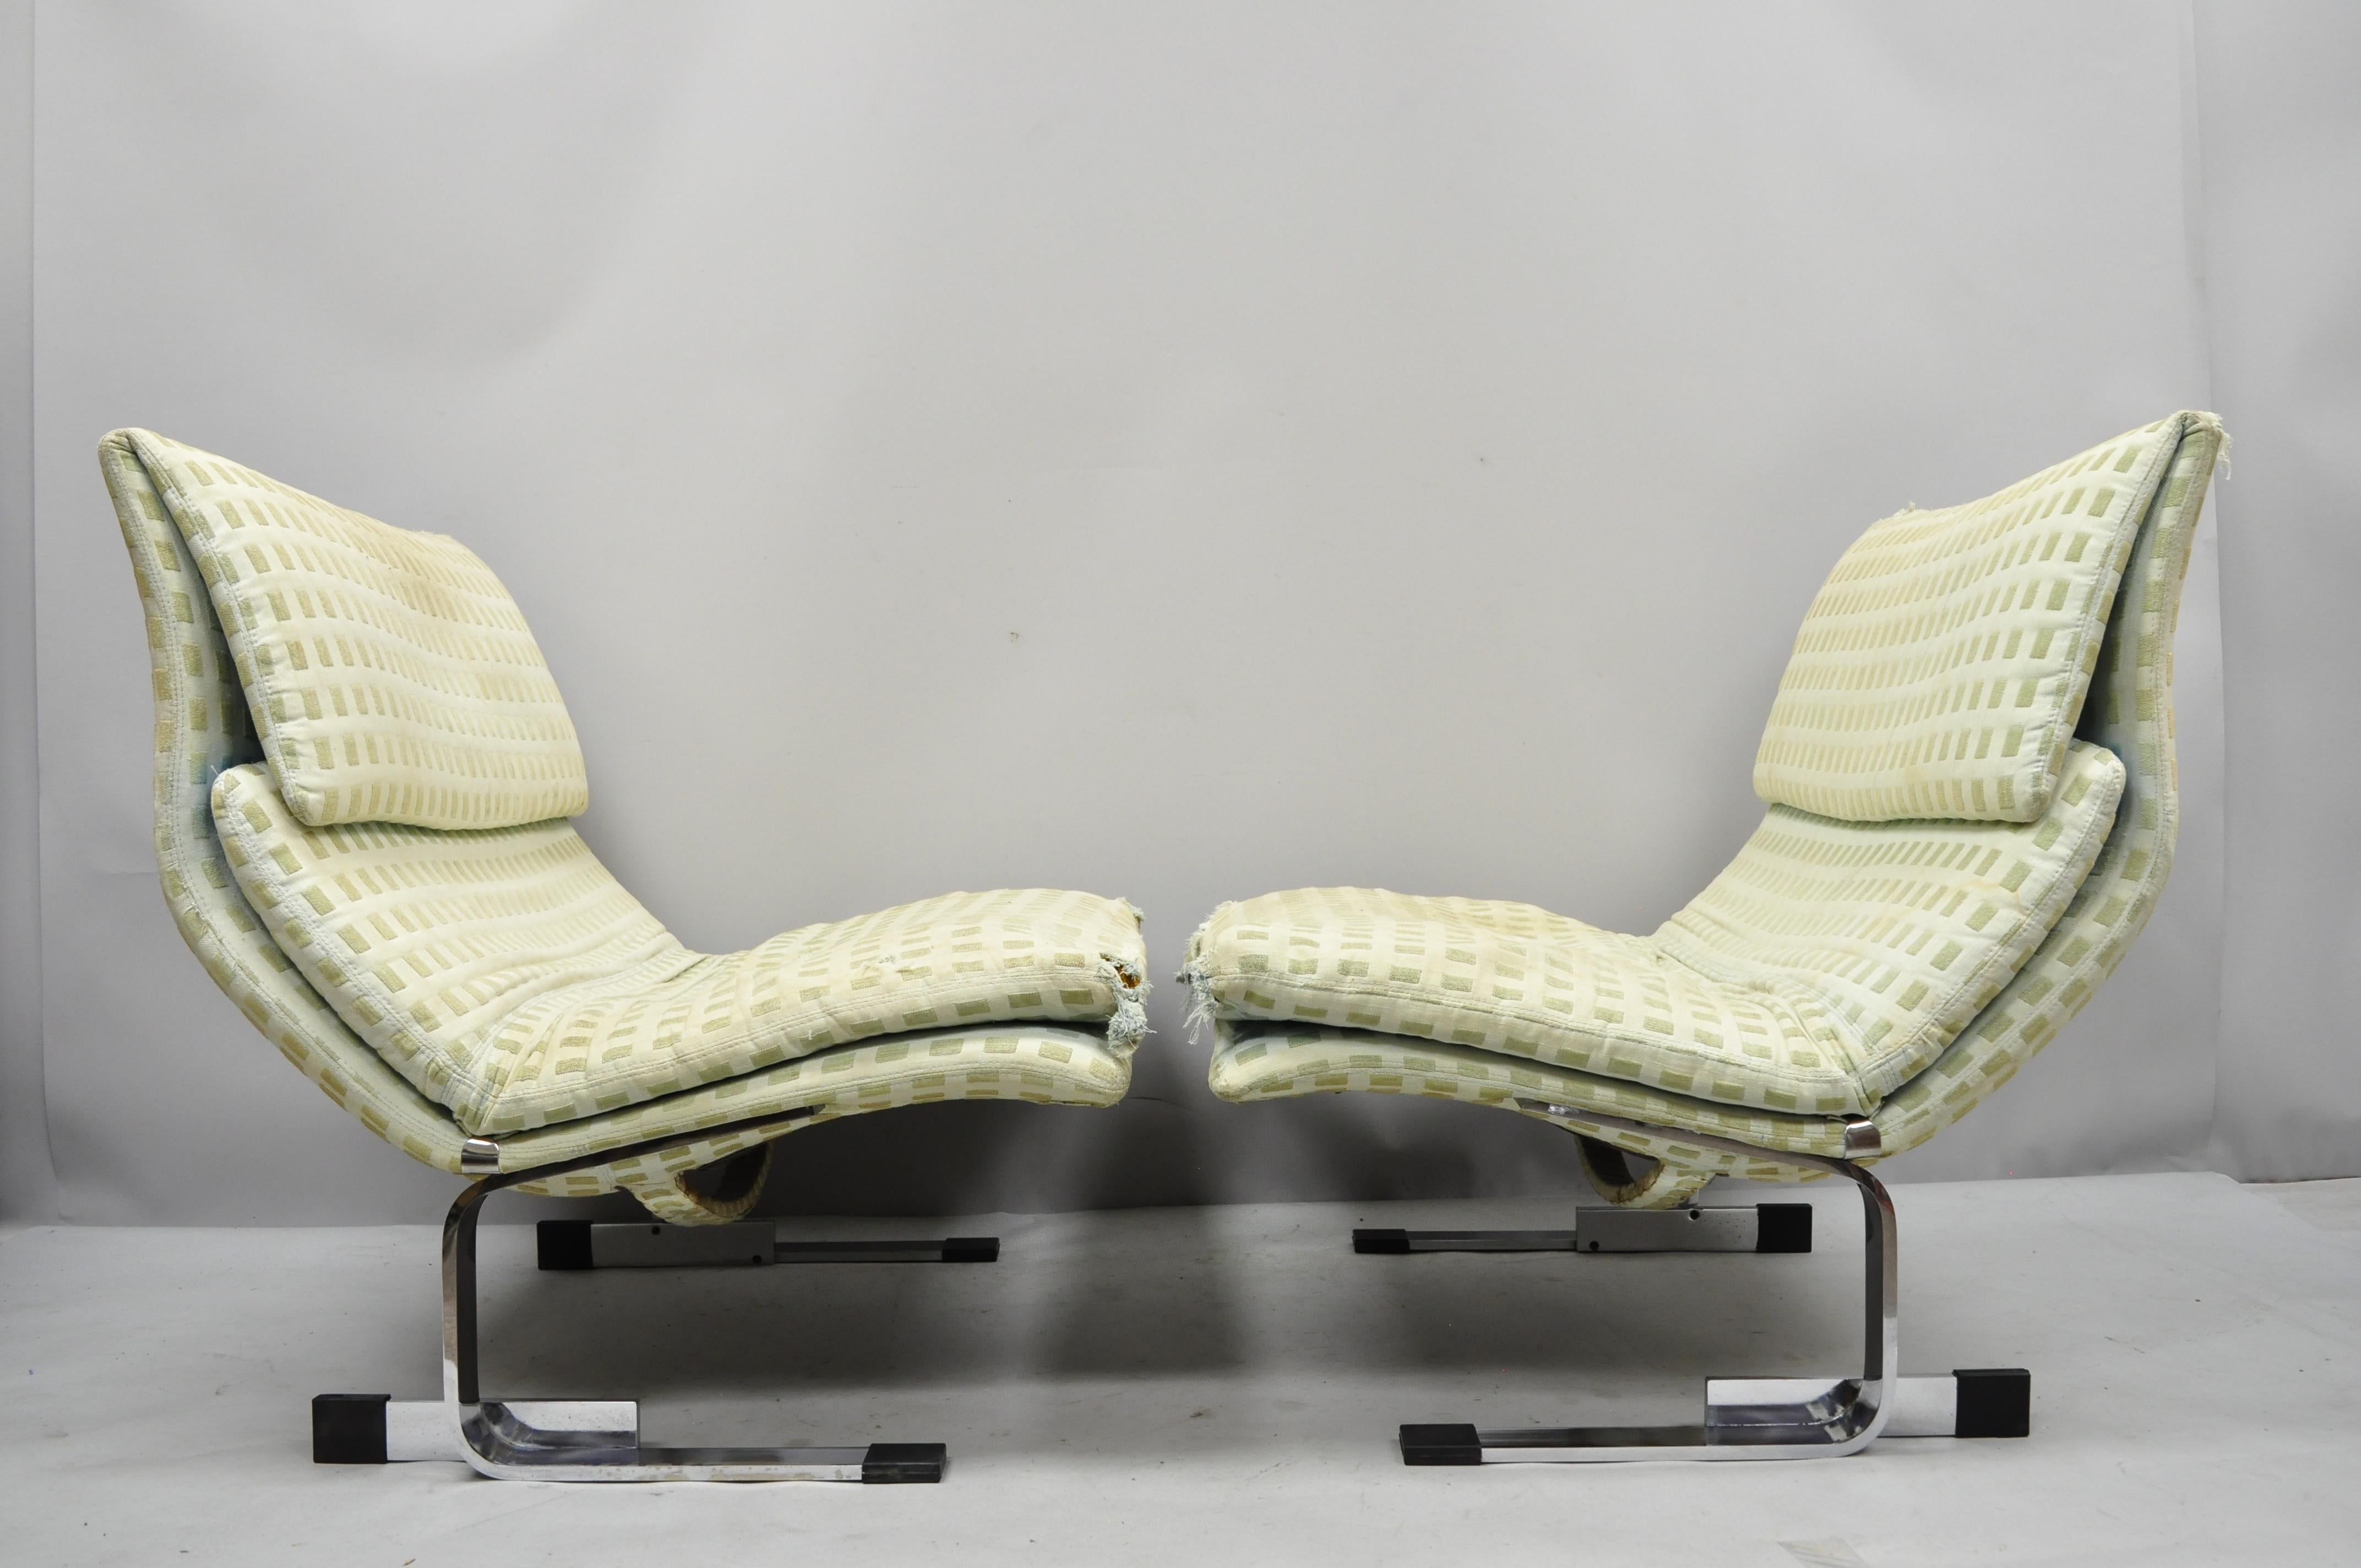 Pair of Italian Chrome Onda Wave Lounge Chairs by Giovanni Offredi for Saporiti 1